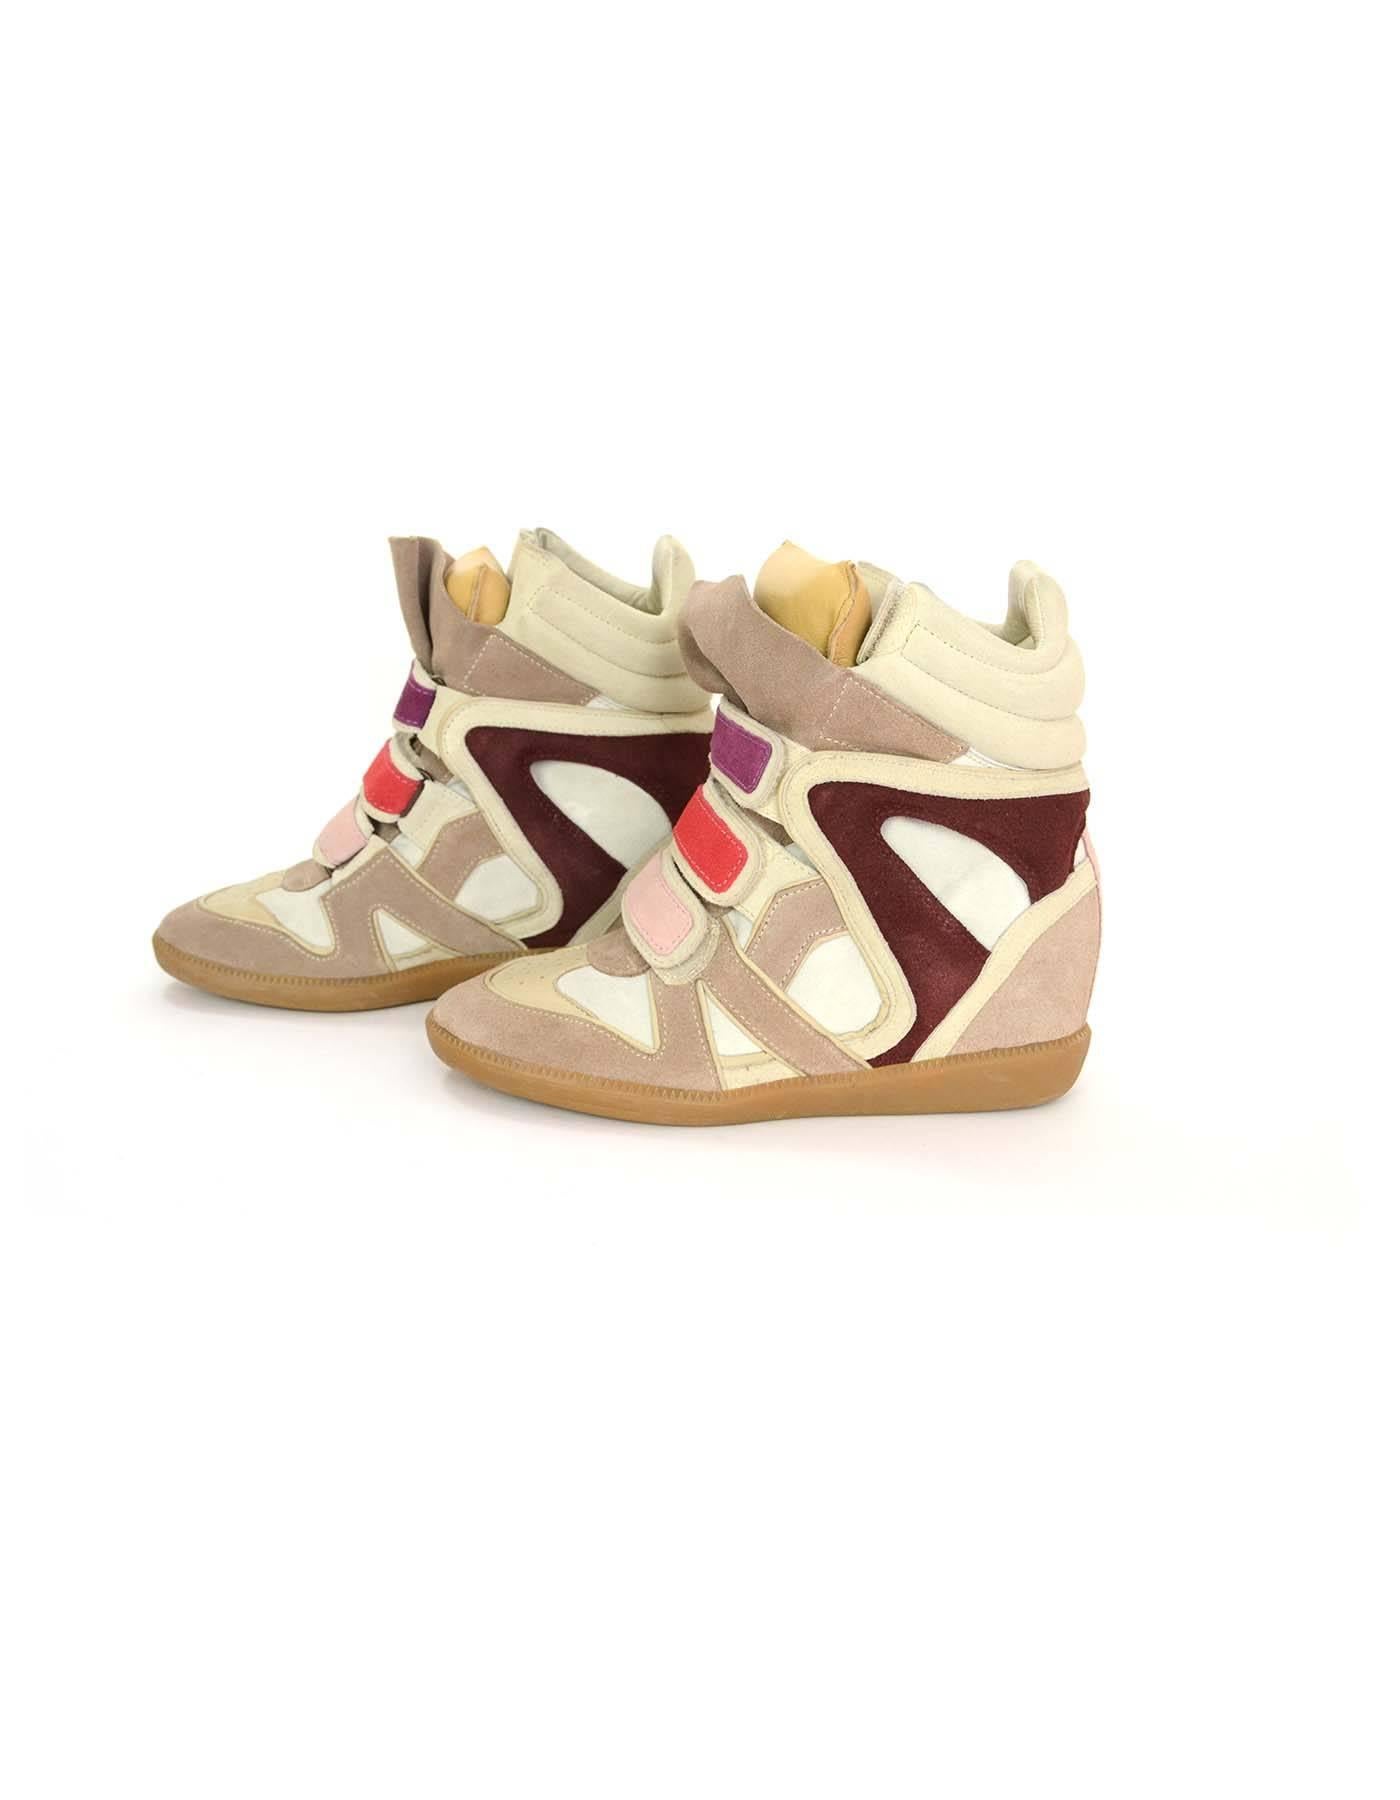 Isabel Marant Beige & Off White Bekket Sneakers sz 36
Features concealed wedge and multi-colored velcro straps

Color: Beige, off white and multi-colored
Materials: Suede and rubber
Closure/Opening: Velcro closure
Sole Stamp: Isabel Marant